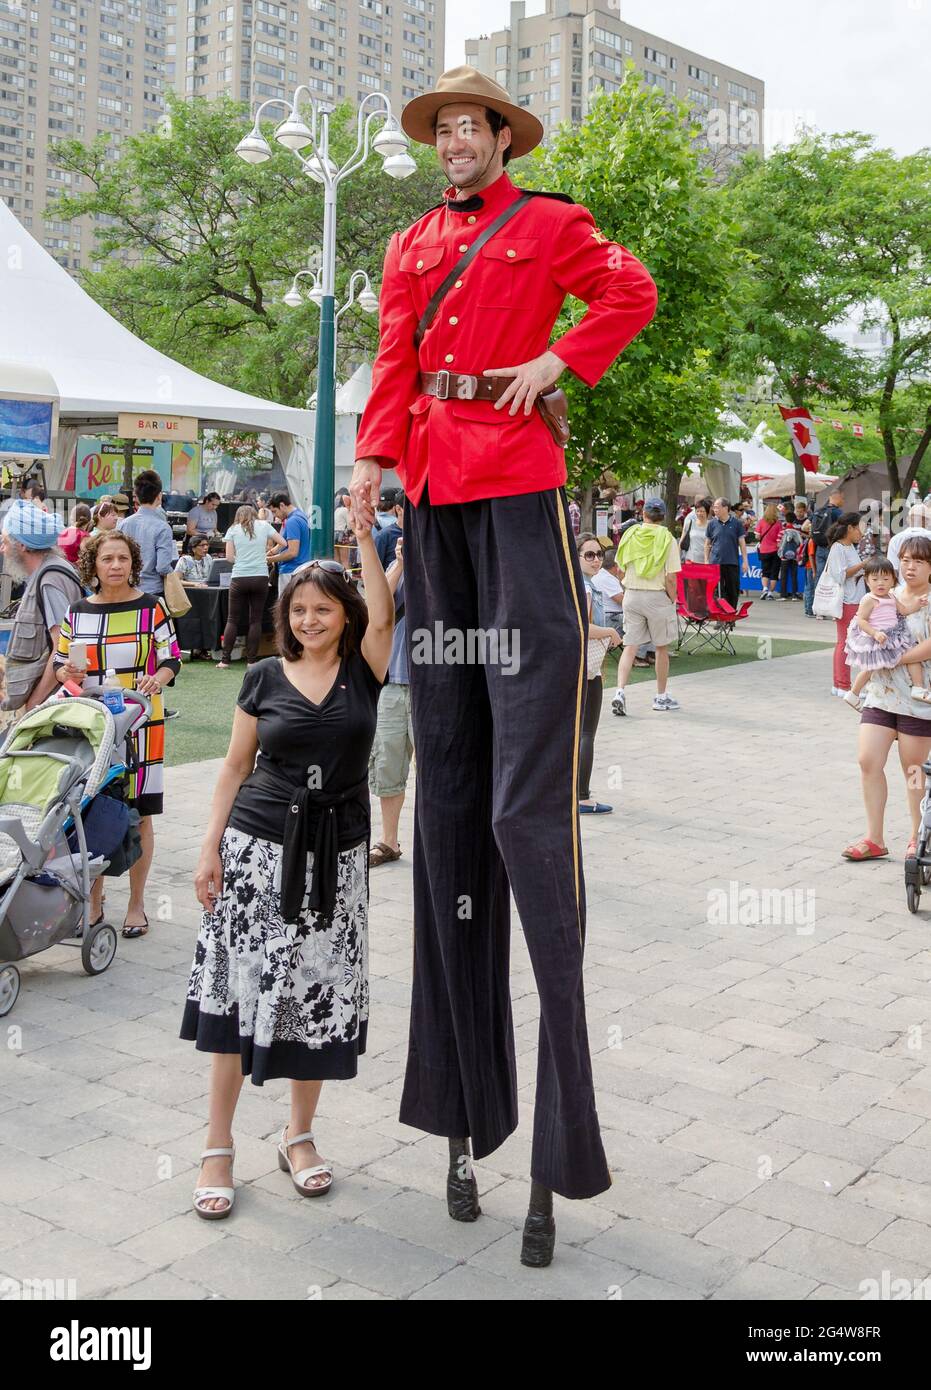 Canadian mountie on a Canada Day holiday on stilts poses with a smiling woman for tourist photographs. Stock Photo